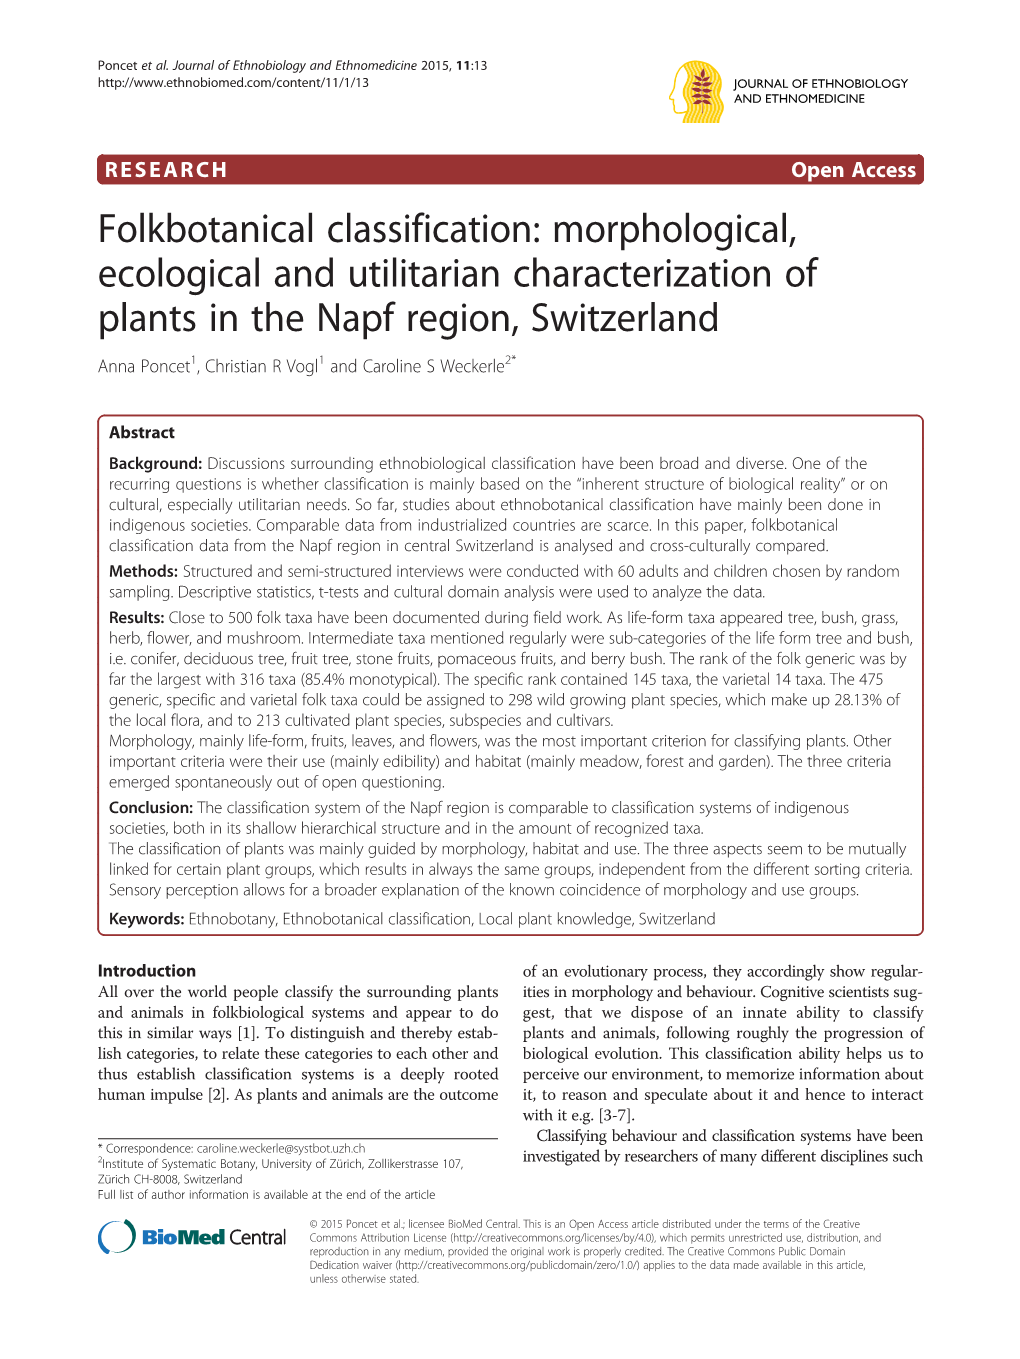 Folkbotanical Classification: Morphological, Ecological and Utilitarian Characterization of Plants in the Napf Region, Switzerla